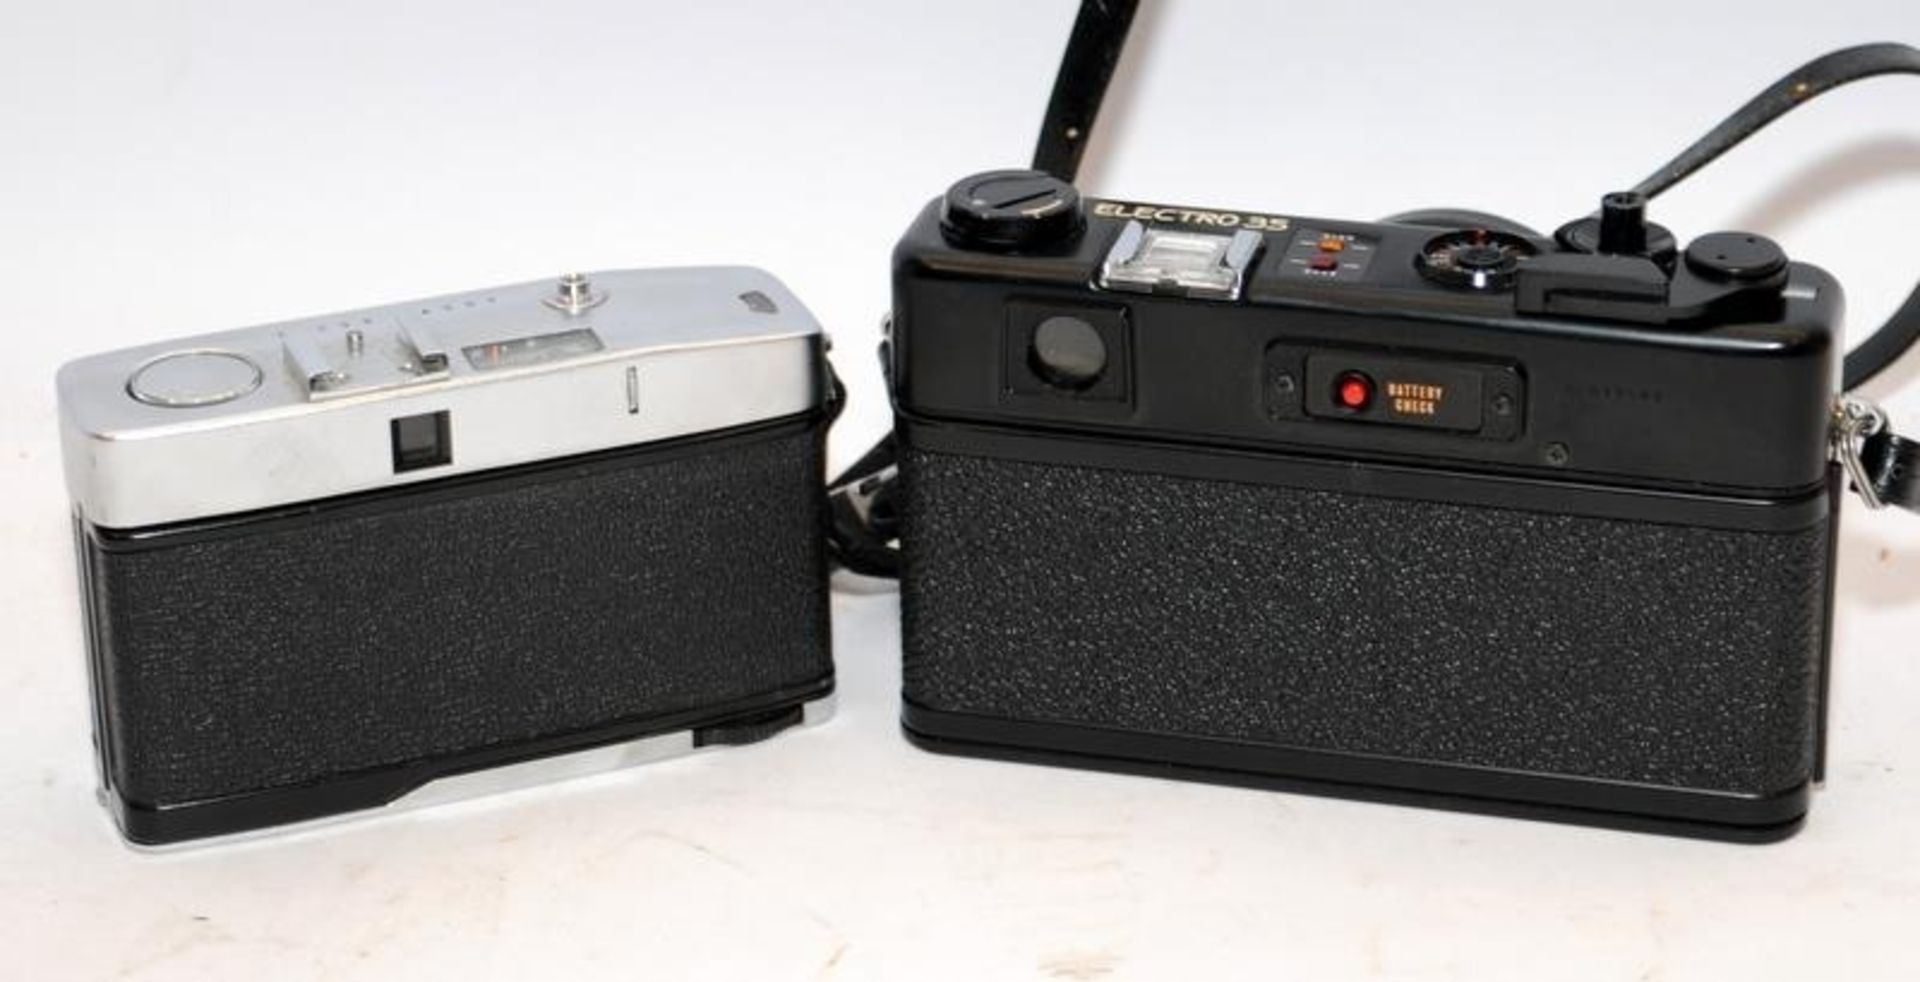 2 x vintage 35mm cameras to include Yashica Electro 35 rangefinder and a Ricoh Caddy - Image 2 of 3